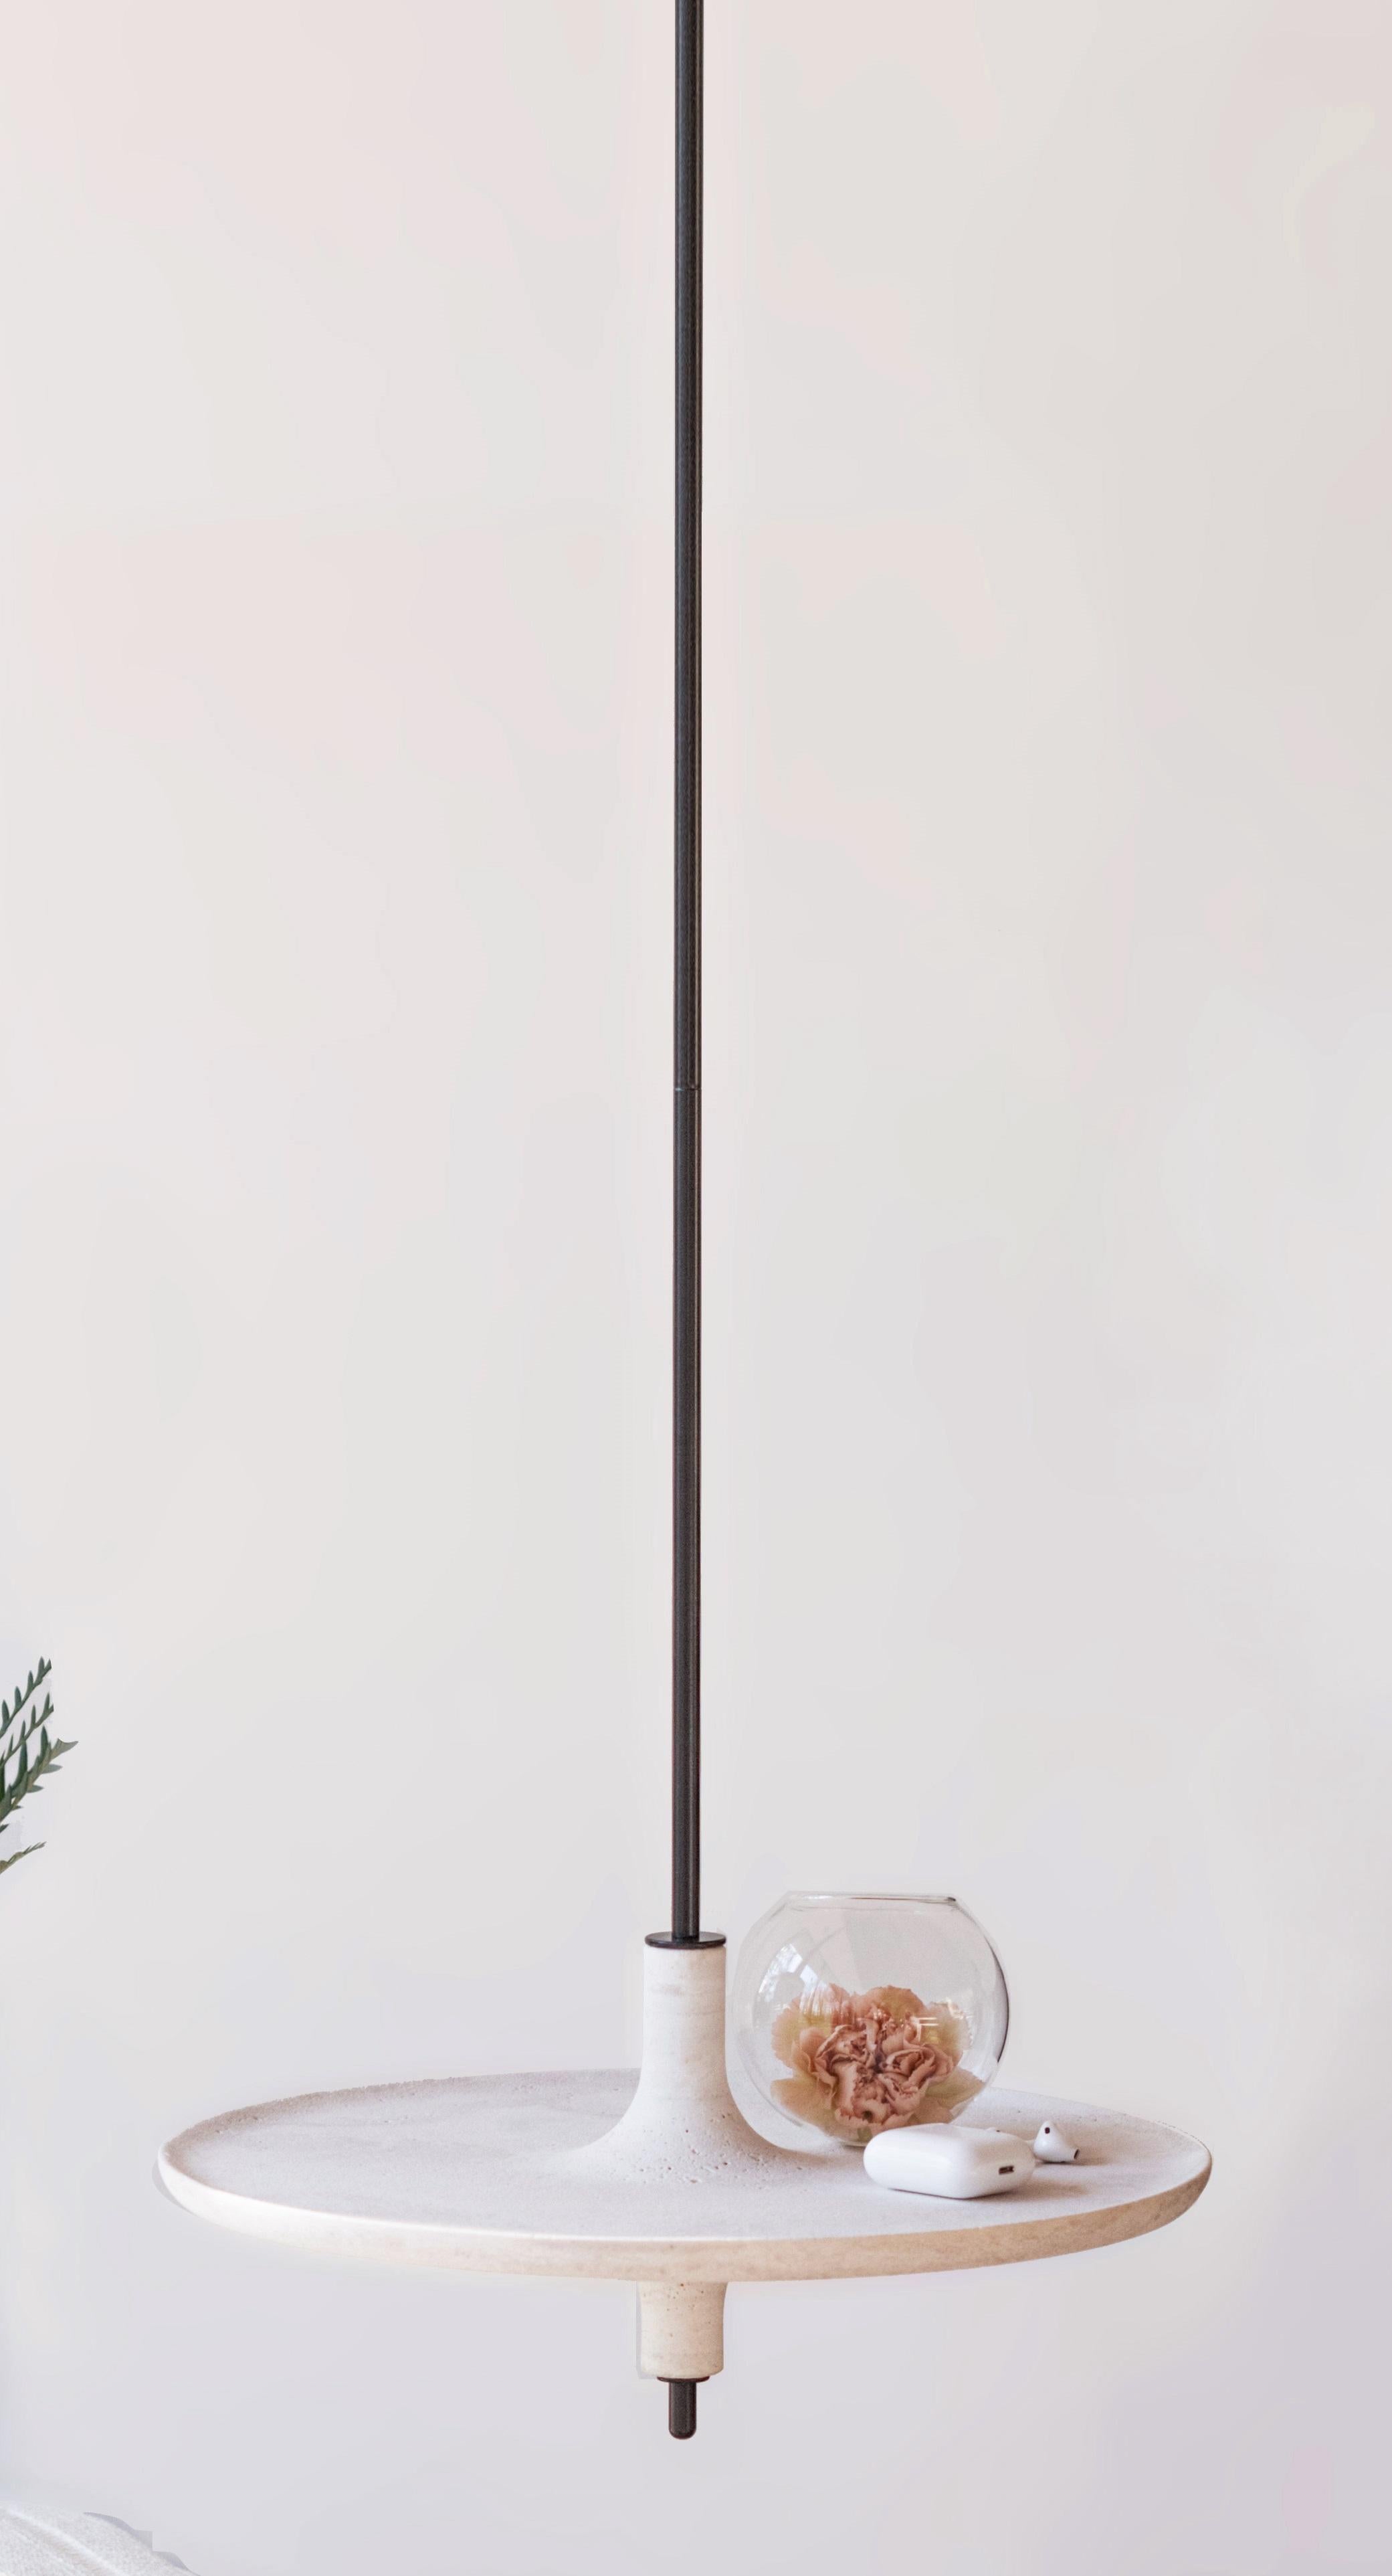 Toupy Travertine and Black Metal 38 Hanging Table by Mademoiselle Jo
Dimensions: Ø 38 x H 150 cm.
Materials: Travertine and black metal.

Available in four wood colors, three marble options, two bar versions and several diameters. Please contact us.